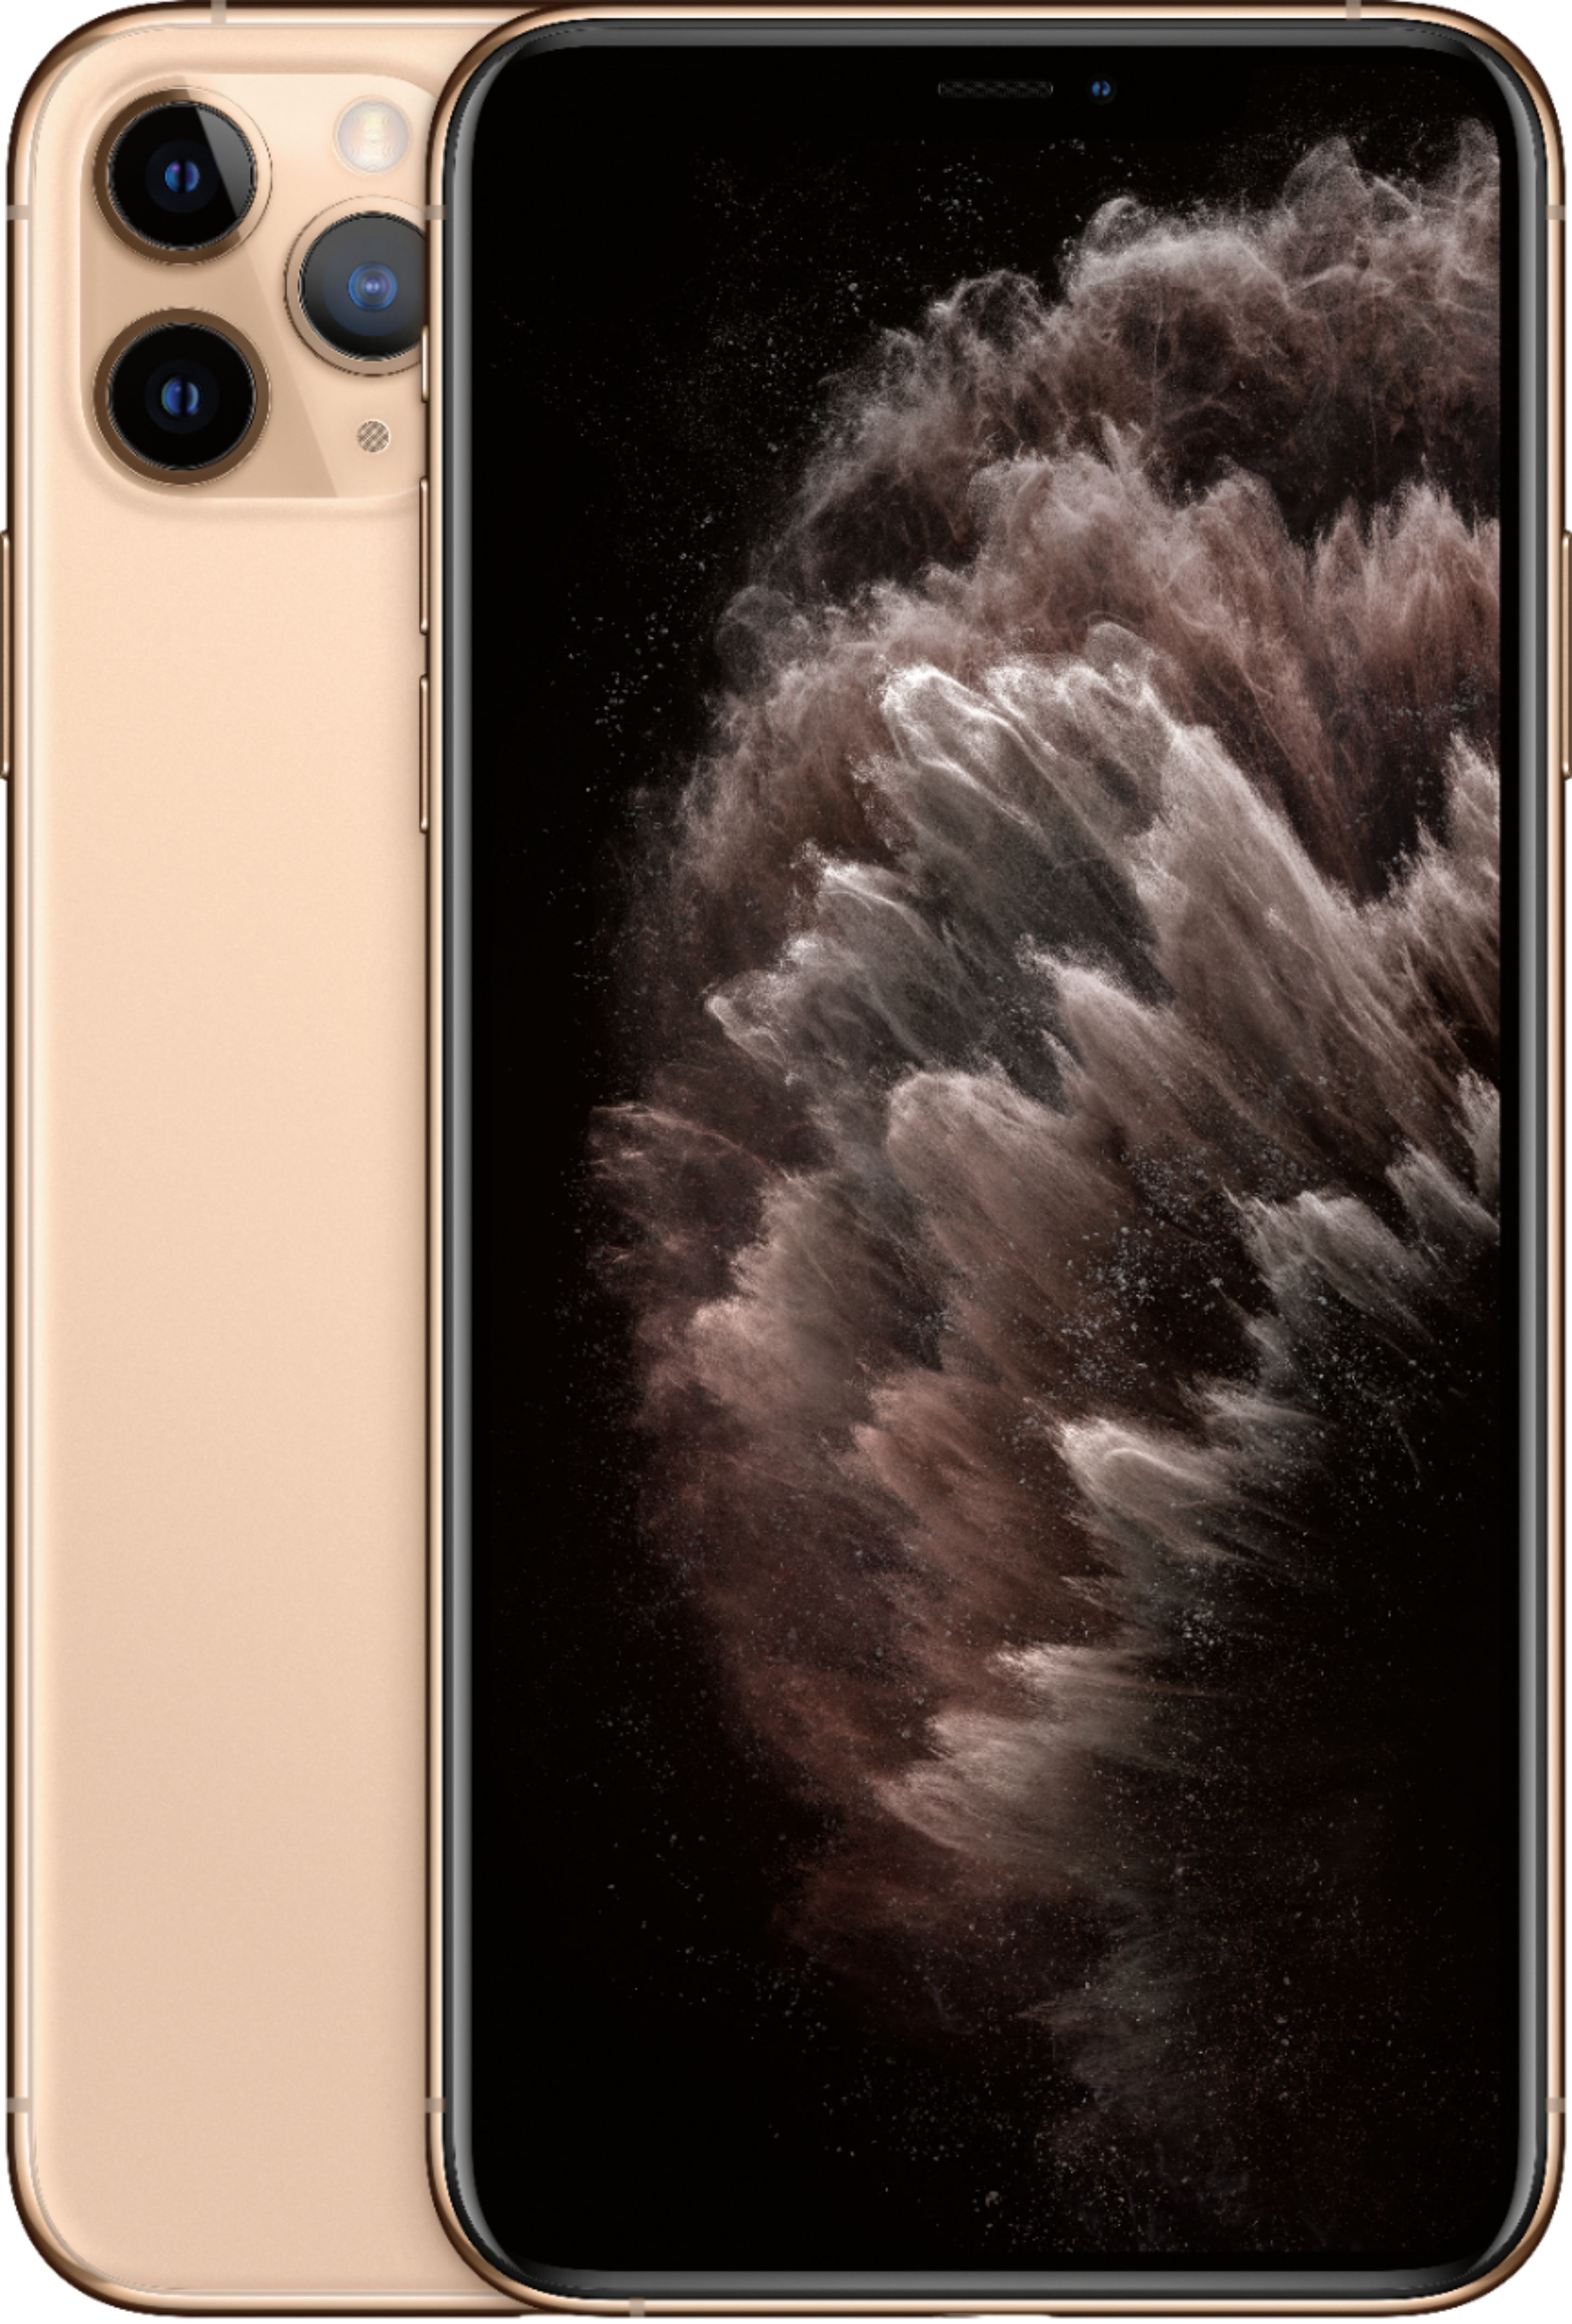 Best Buy Apple Iphone 11 Pro Max 64gb Gold At T Mwh12ll A